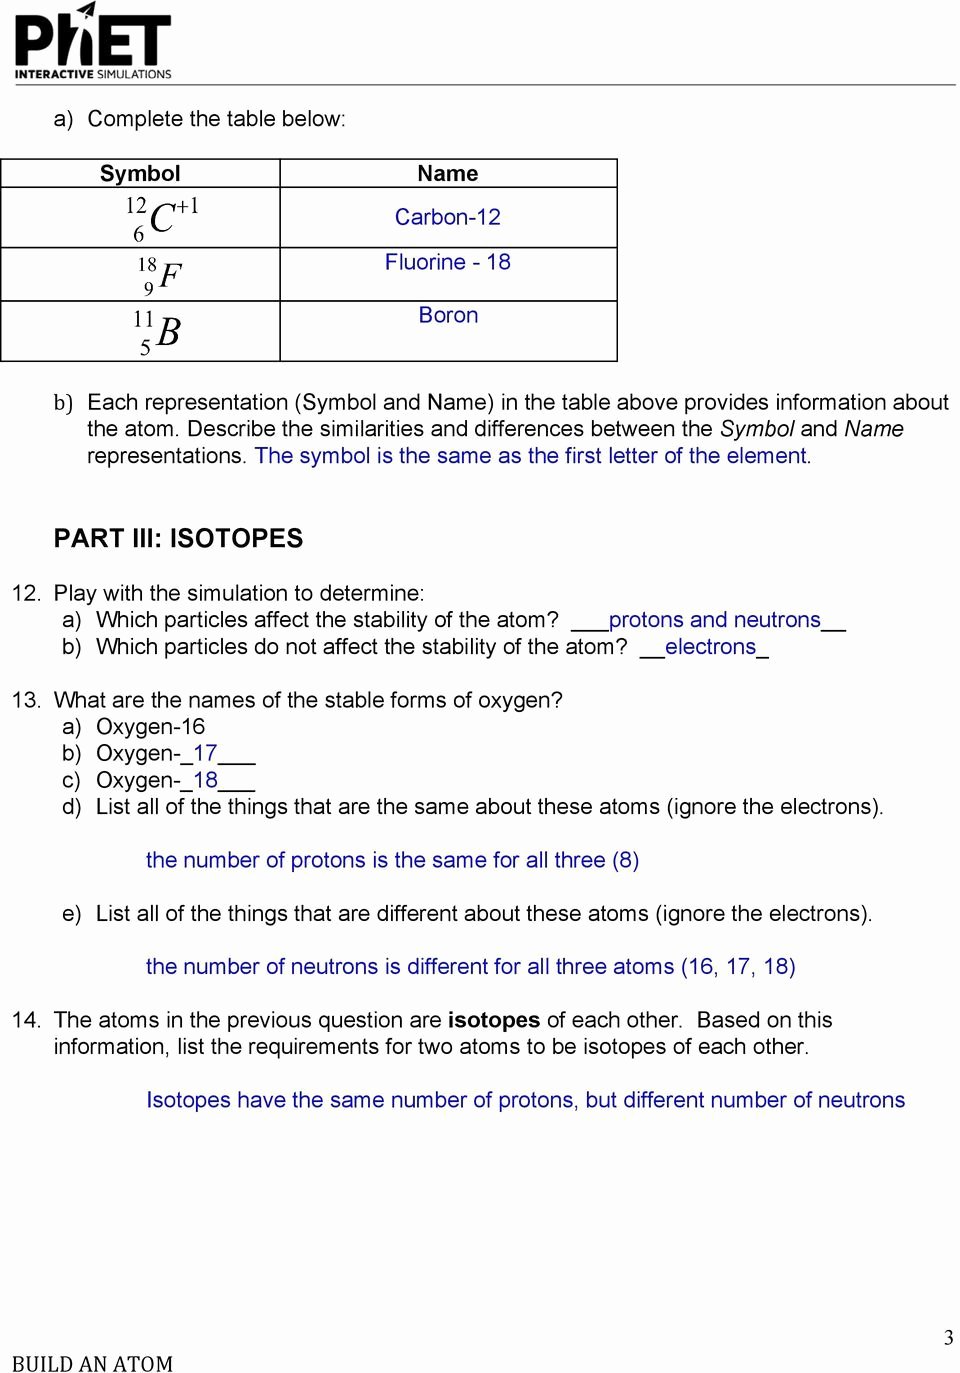 Build An atom Worksheet Answers Unique isotopes Different Elements Chapter 4 Worksheet Answers